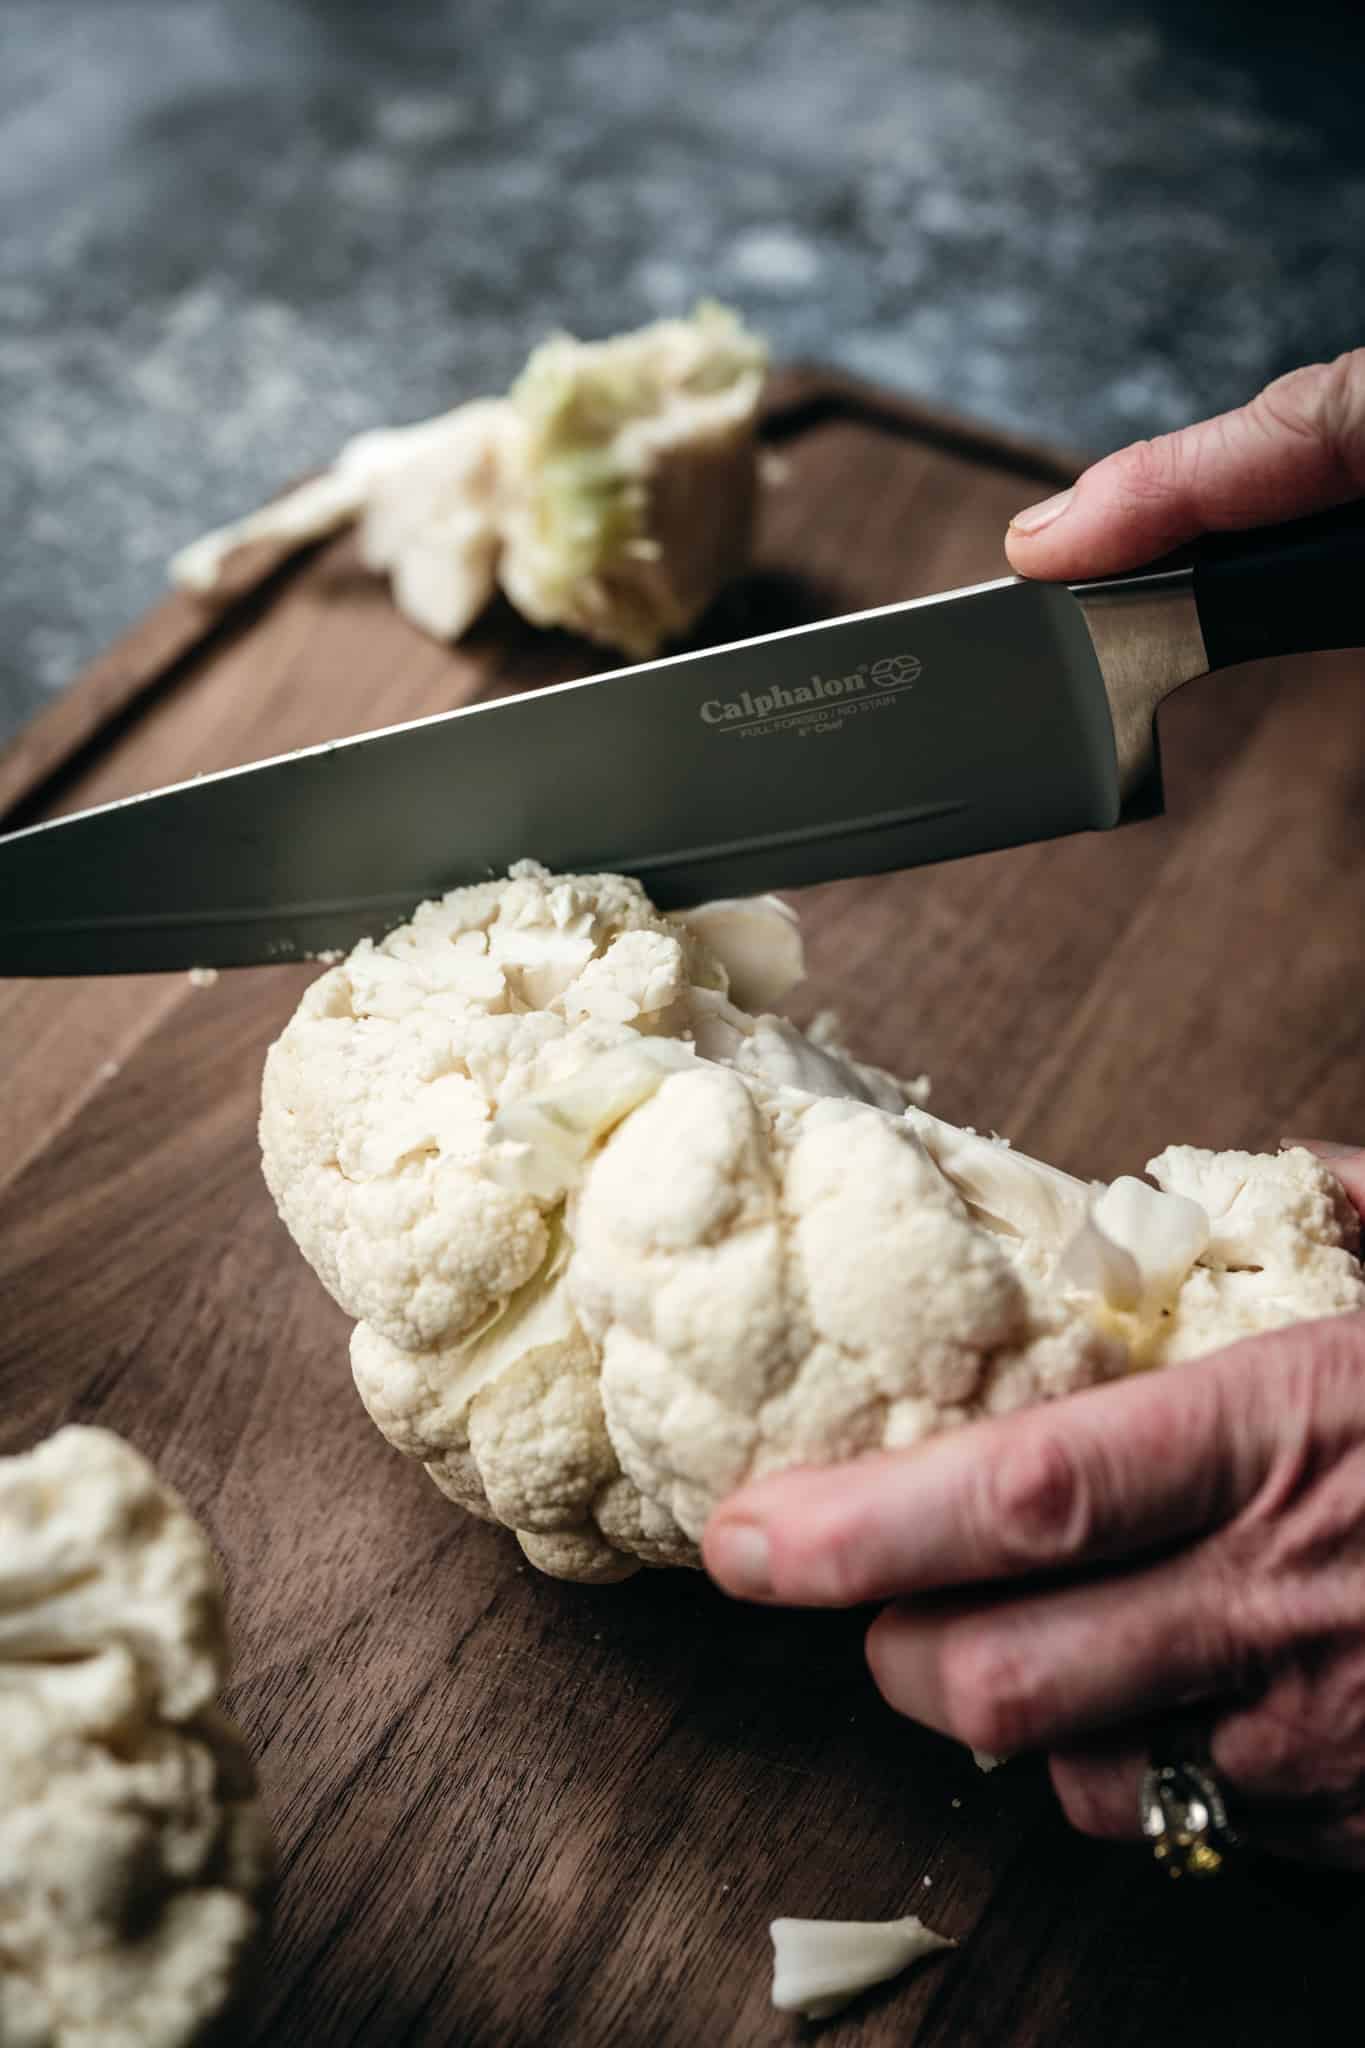 45 degree angle of a person slicing a head of cauliflower on a wooden cutting board with a chef's knife